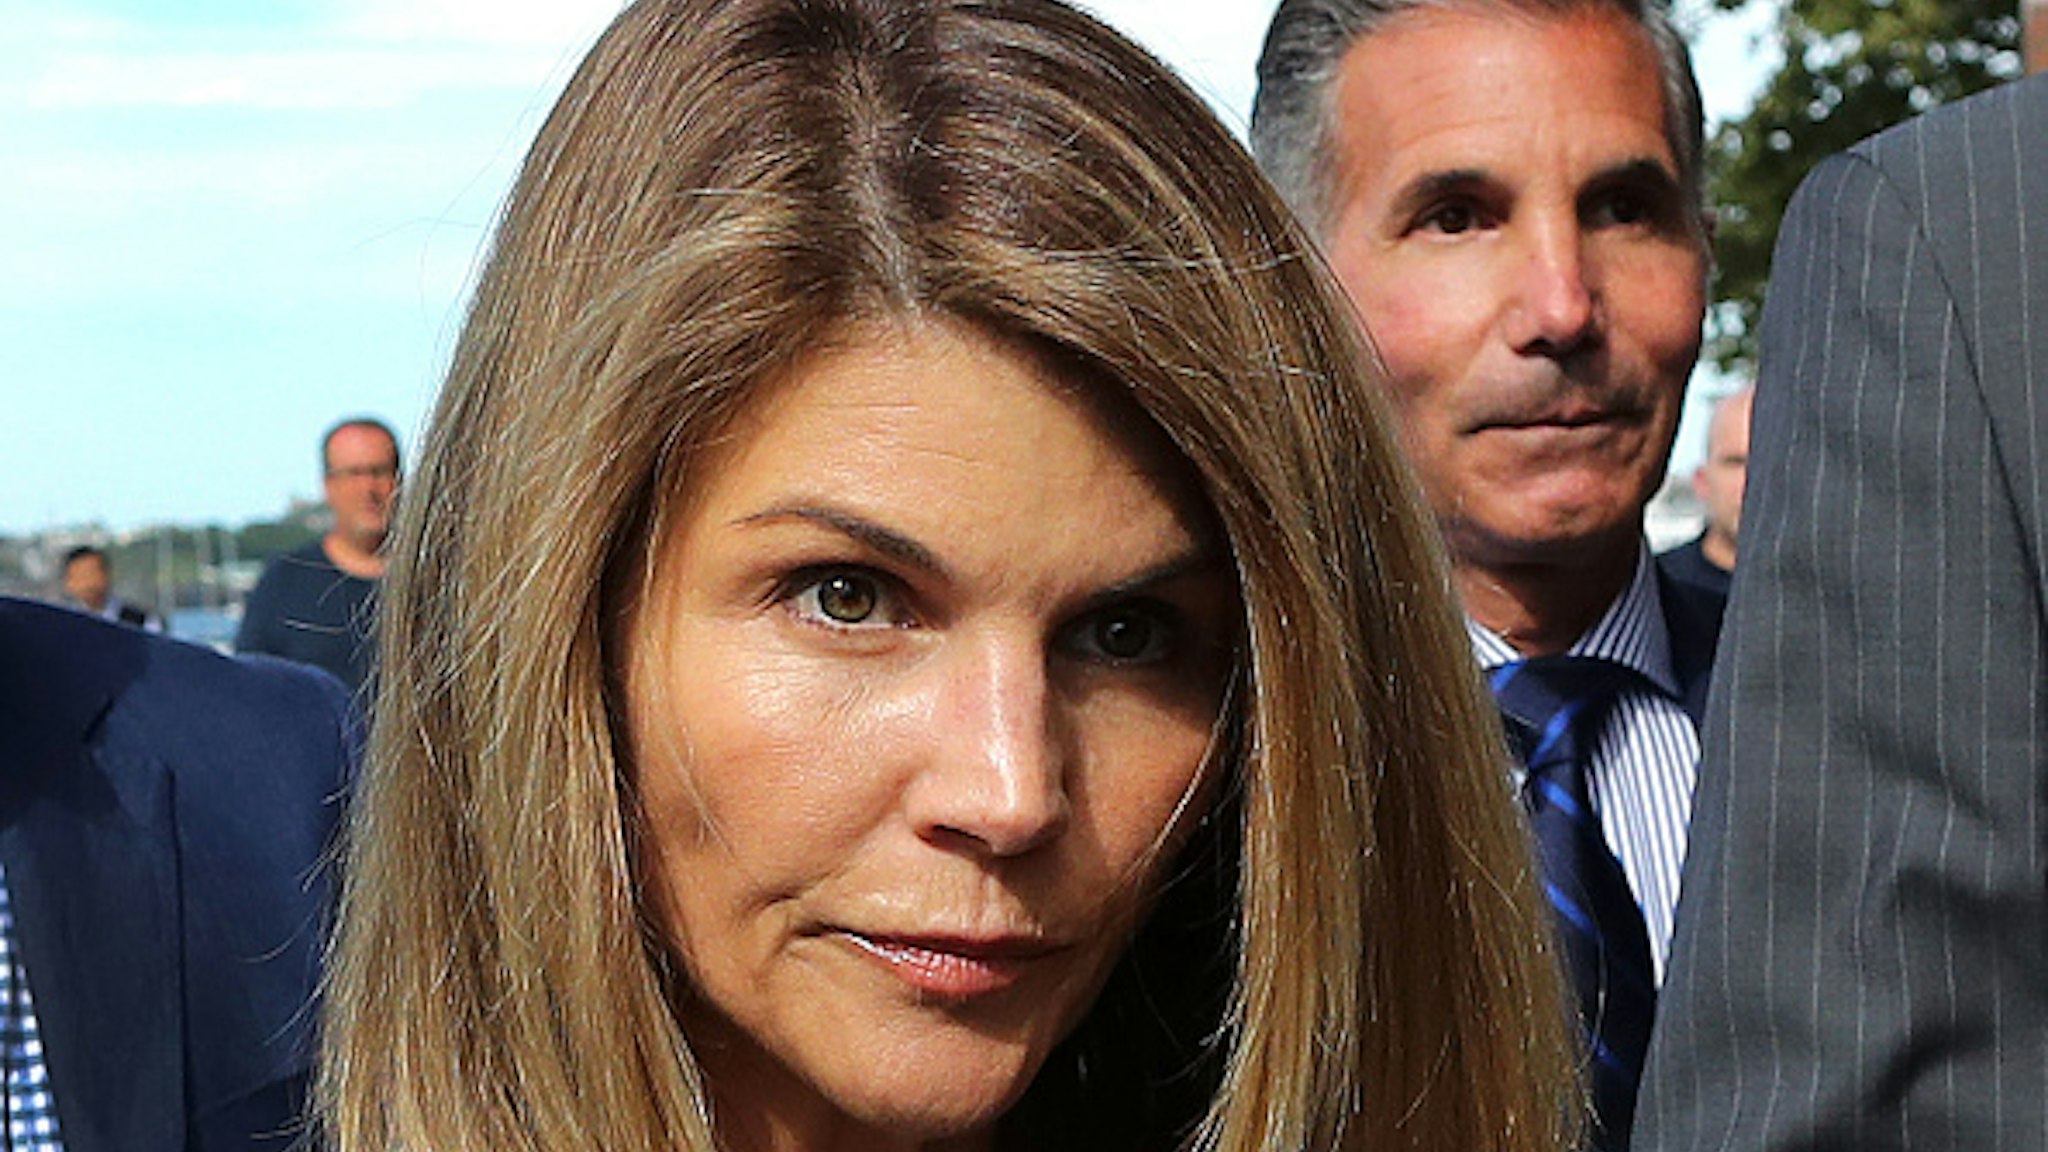 BOSTON, MA - AUGUST 27: Lori Loughlin and her husband Mossimo Giannulli, right, leave the John Joseph Moakley United States Courthouse in Boston on Aug. 27, 2019. A judge says actress Lori Loughlin and her fashion designer husband, Mossimo Giannulli, can continue using a law firm that recently represented the University of Southern California. The couple appeared in Boston federal court on Tuesday to settle a dispute over their choice of lawyers in a sweeping college admissions bribery case. Prosecutors had said their lawyers pose a potential conflict of interest. Loughlin and Giannulli say the firms work for USC was unrelated to the admissions case and was handled by different lawyers.